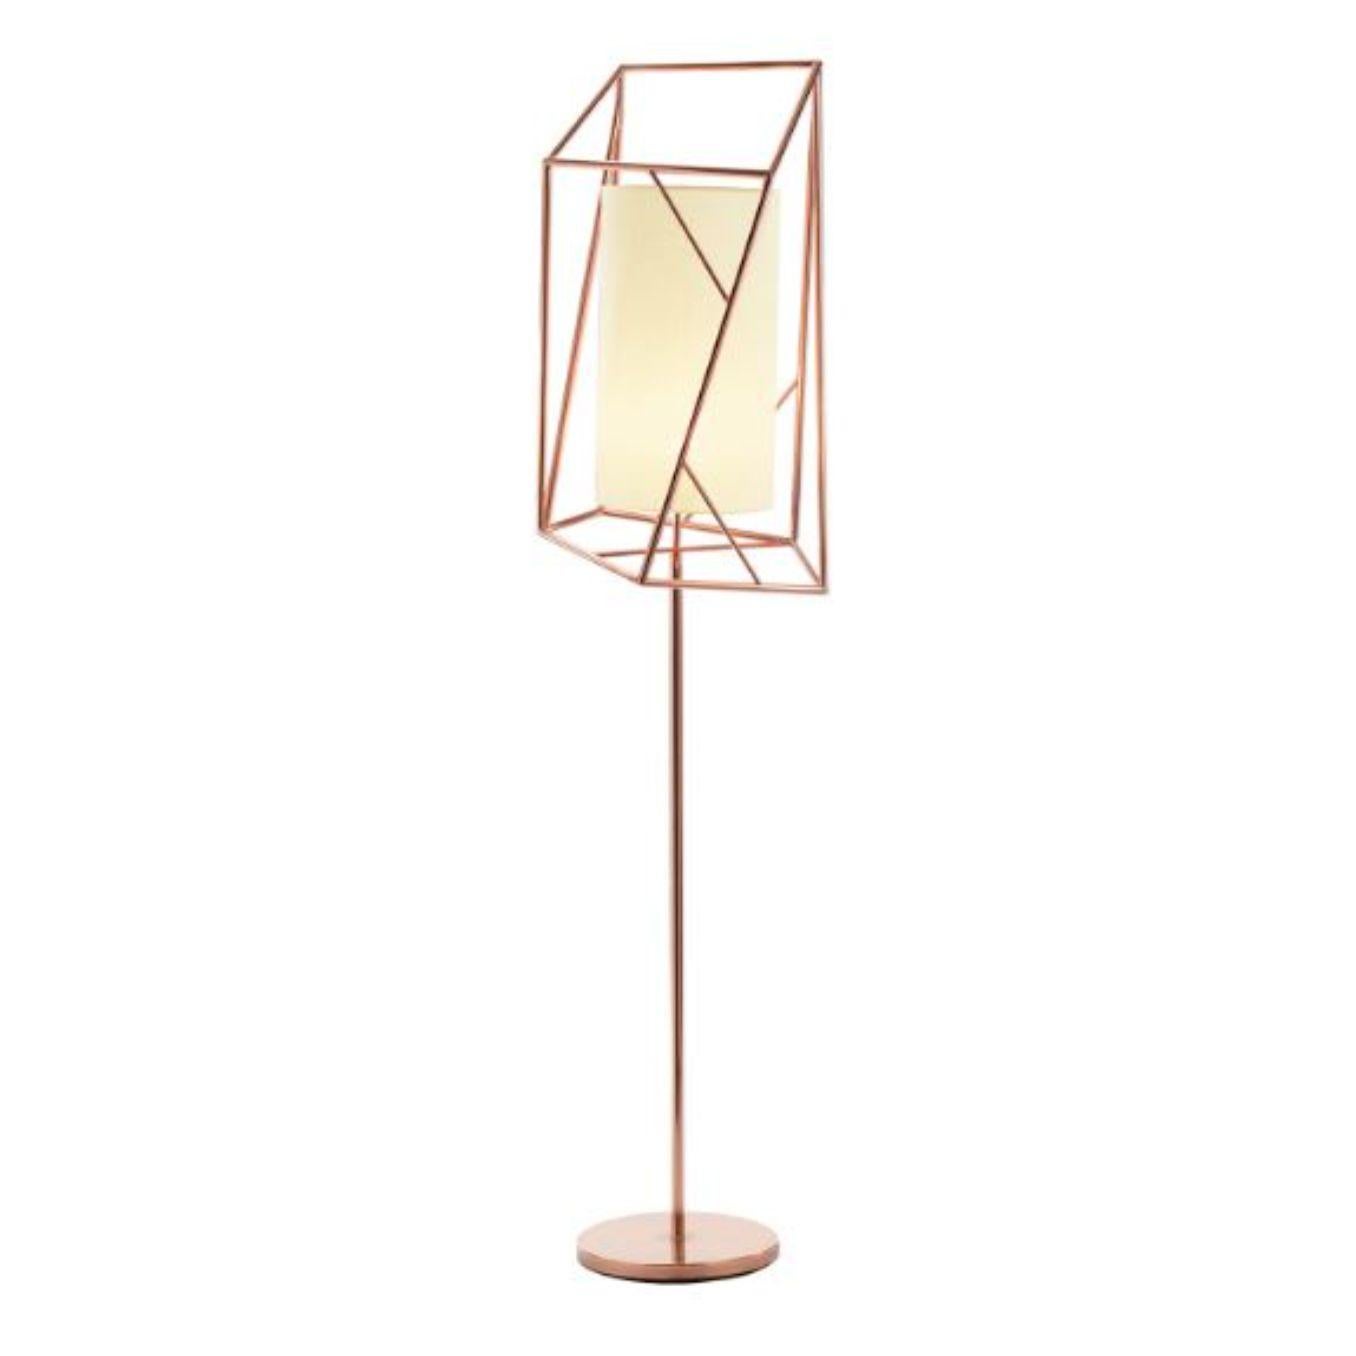 Copper star floor lamp by Dooq.
Dimensions: W 45 x D 45 x H 170 cm
Materials: lacquered metal, polished or satin metal, copper.
abat-jour: linen
Also available in different colors and materials.

Information:
230V/50Hz
E27/1x20W